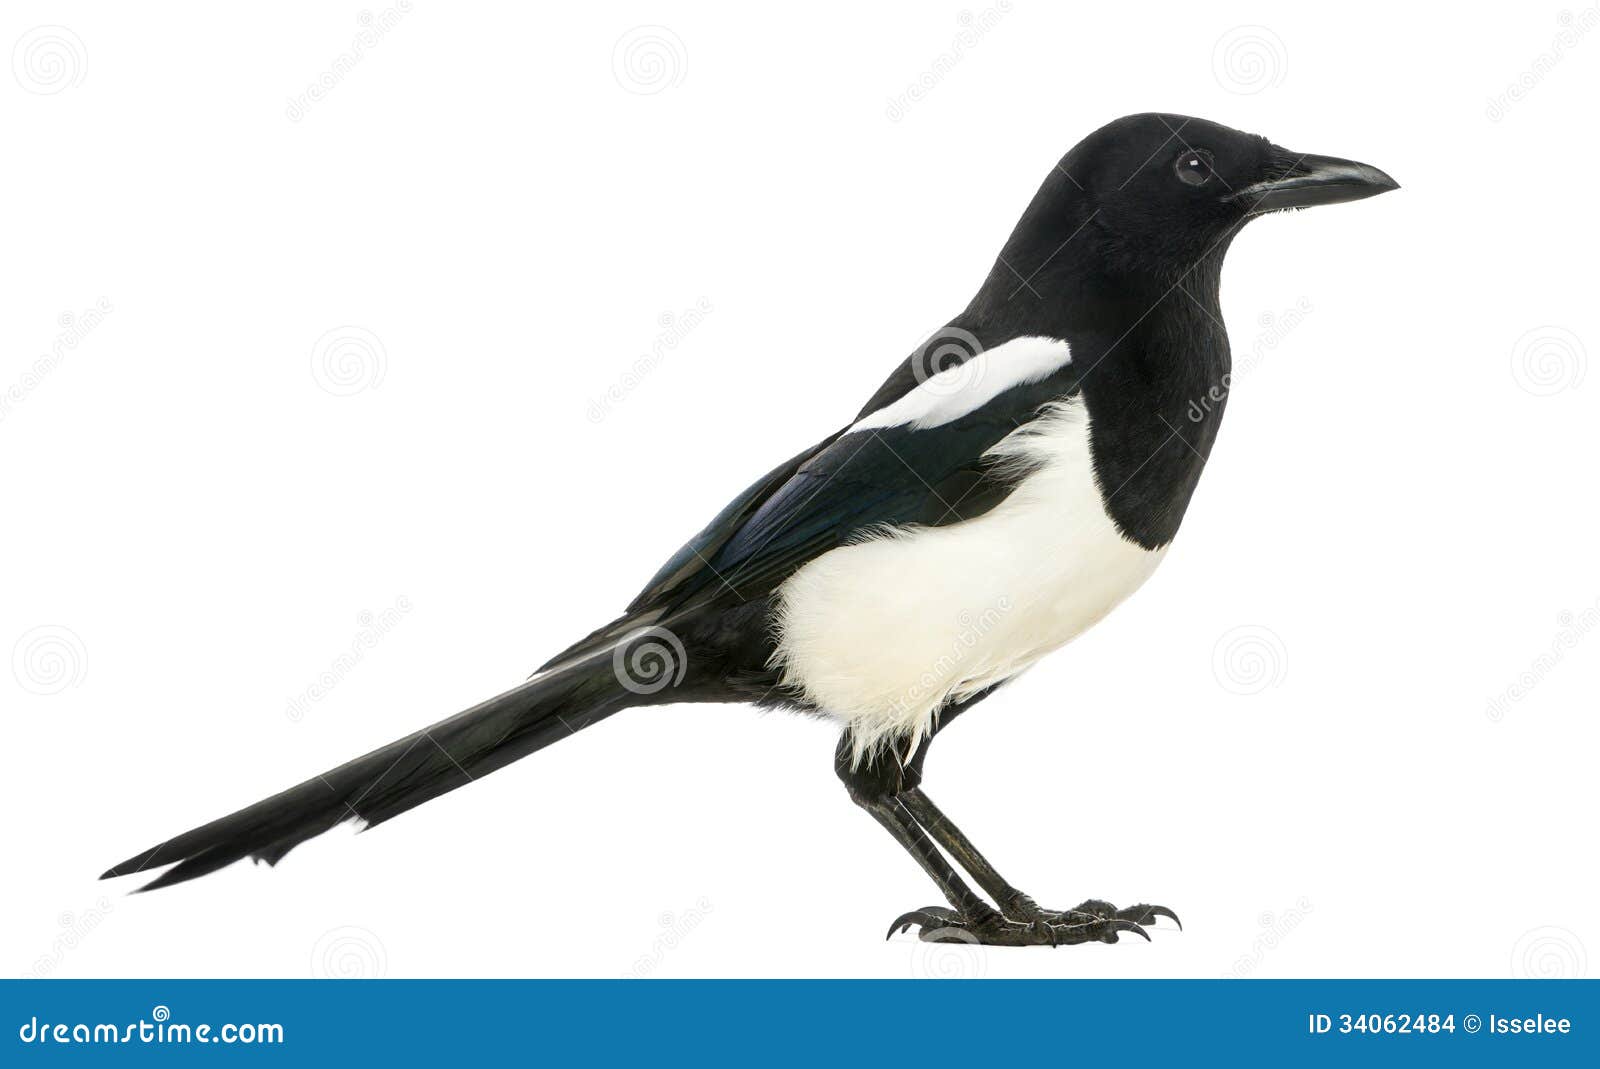 side view of a common magpie, pica pica, 